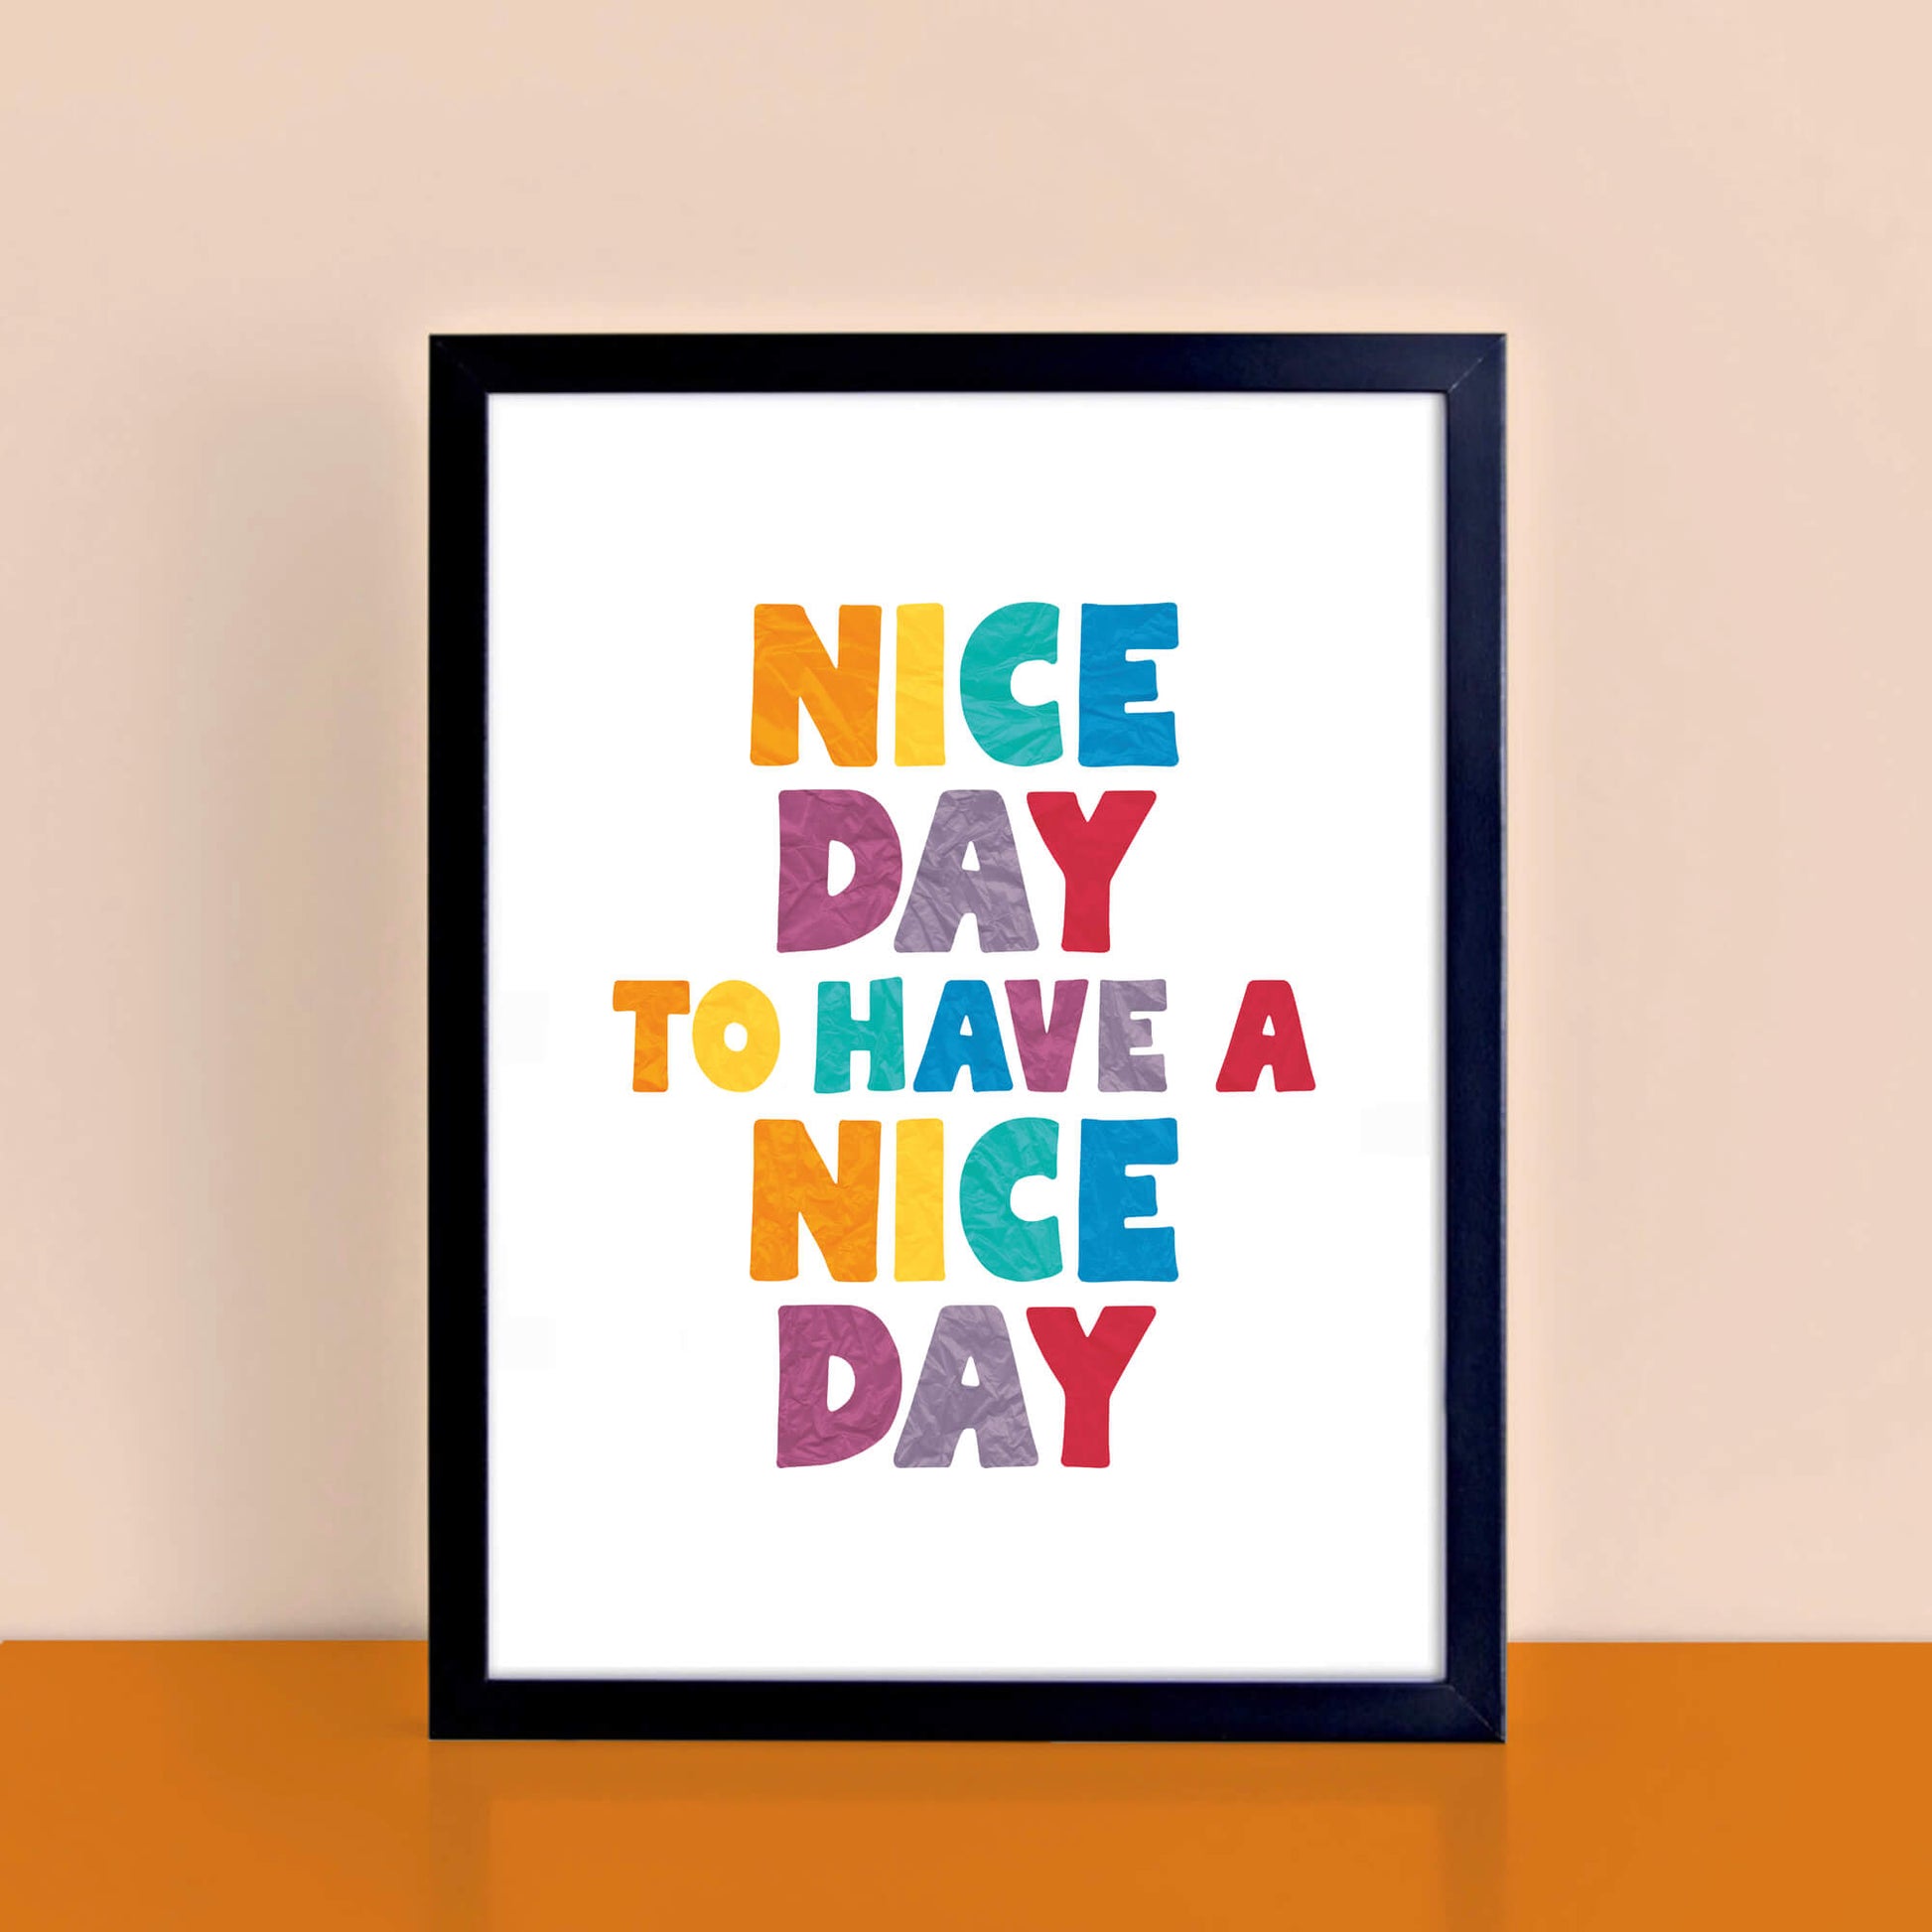 Nice Day To Have A Nice Day Wall Art by SixElevenCreations. Product Code SEP0509